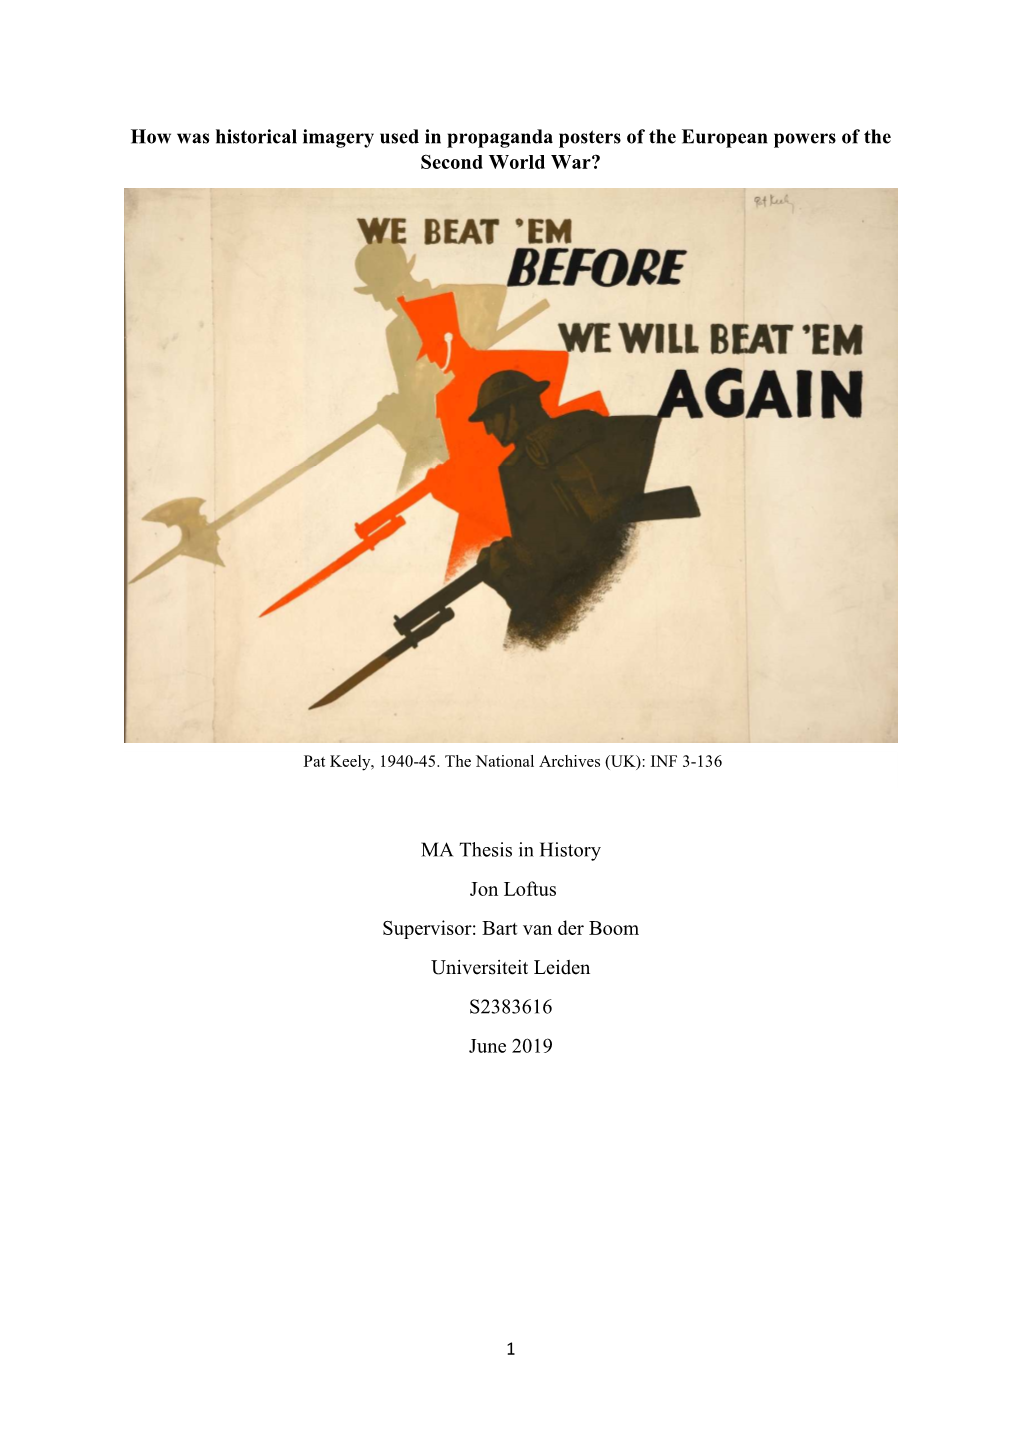 How Was Hsitorical Imagery Sued in the Propagnda Posters of the European Powers of the Second World War?